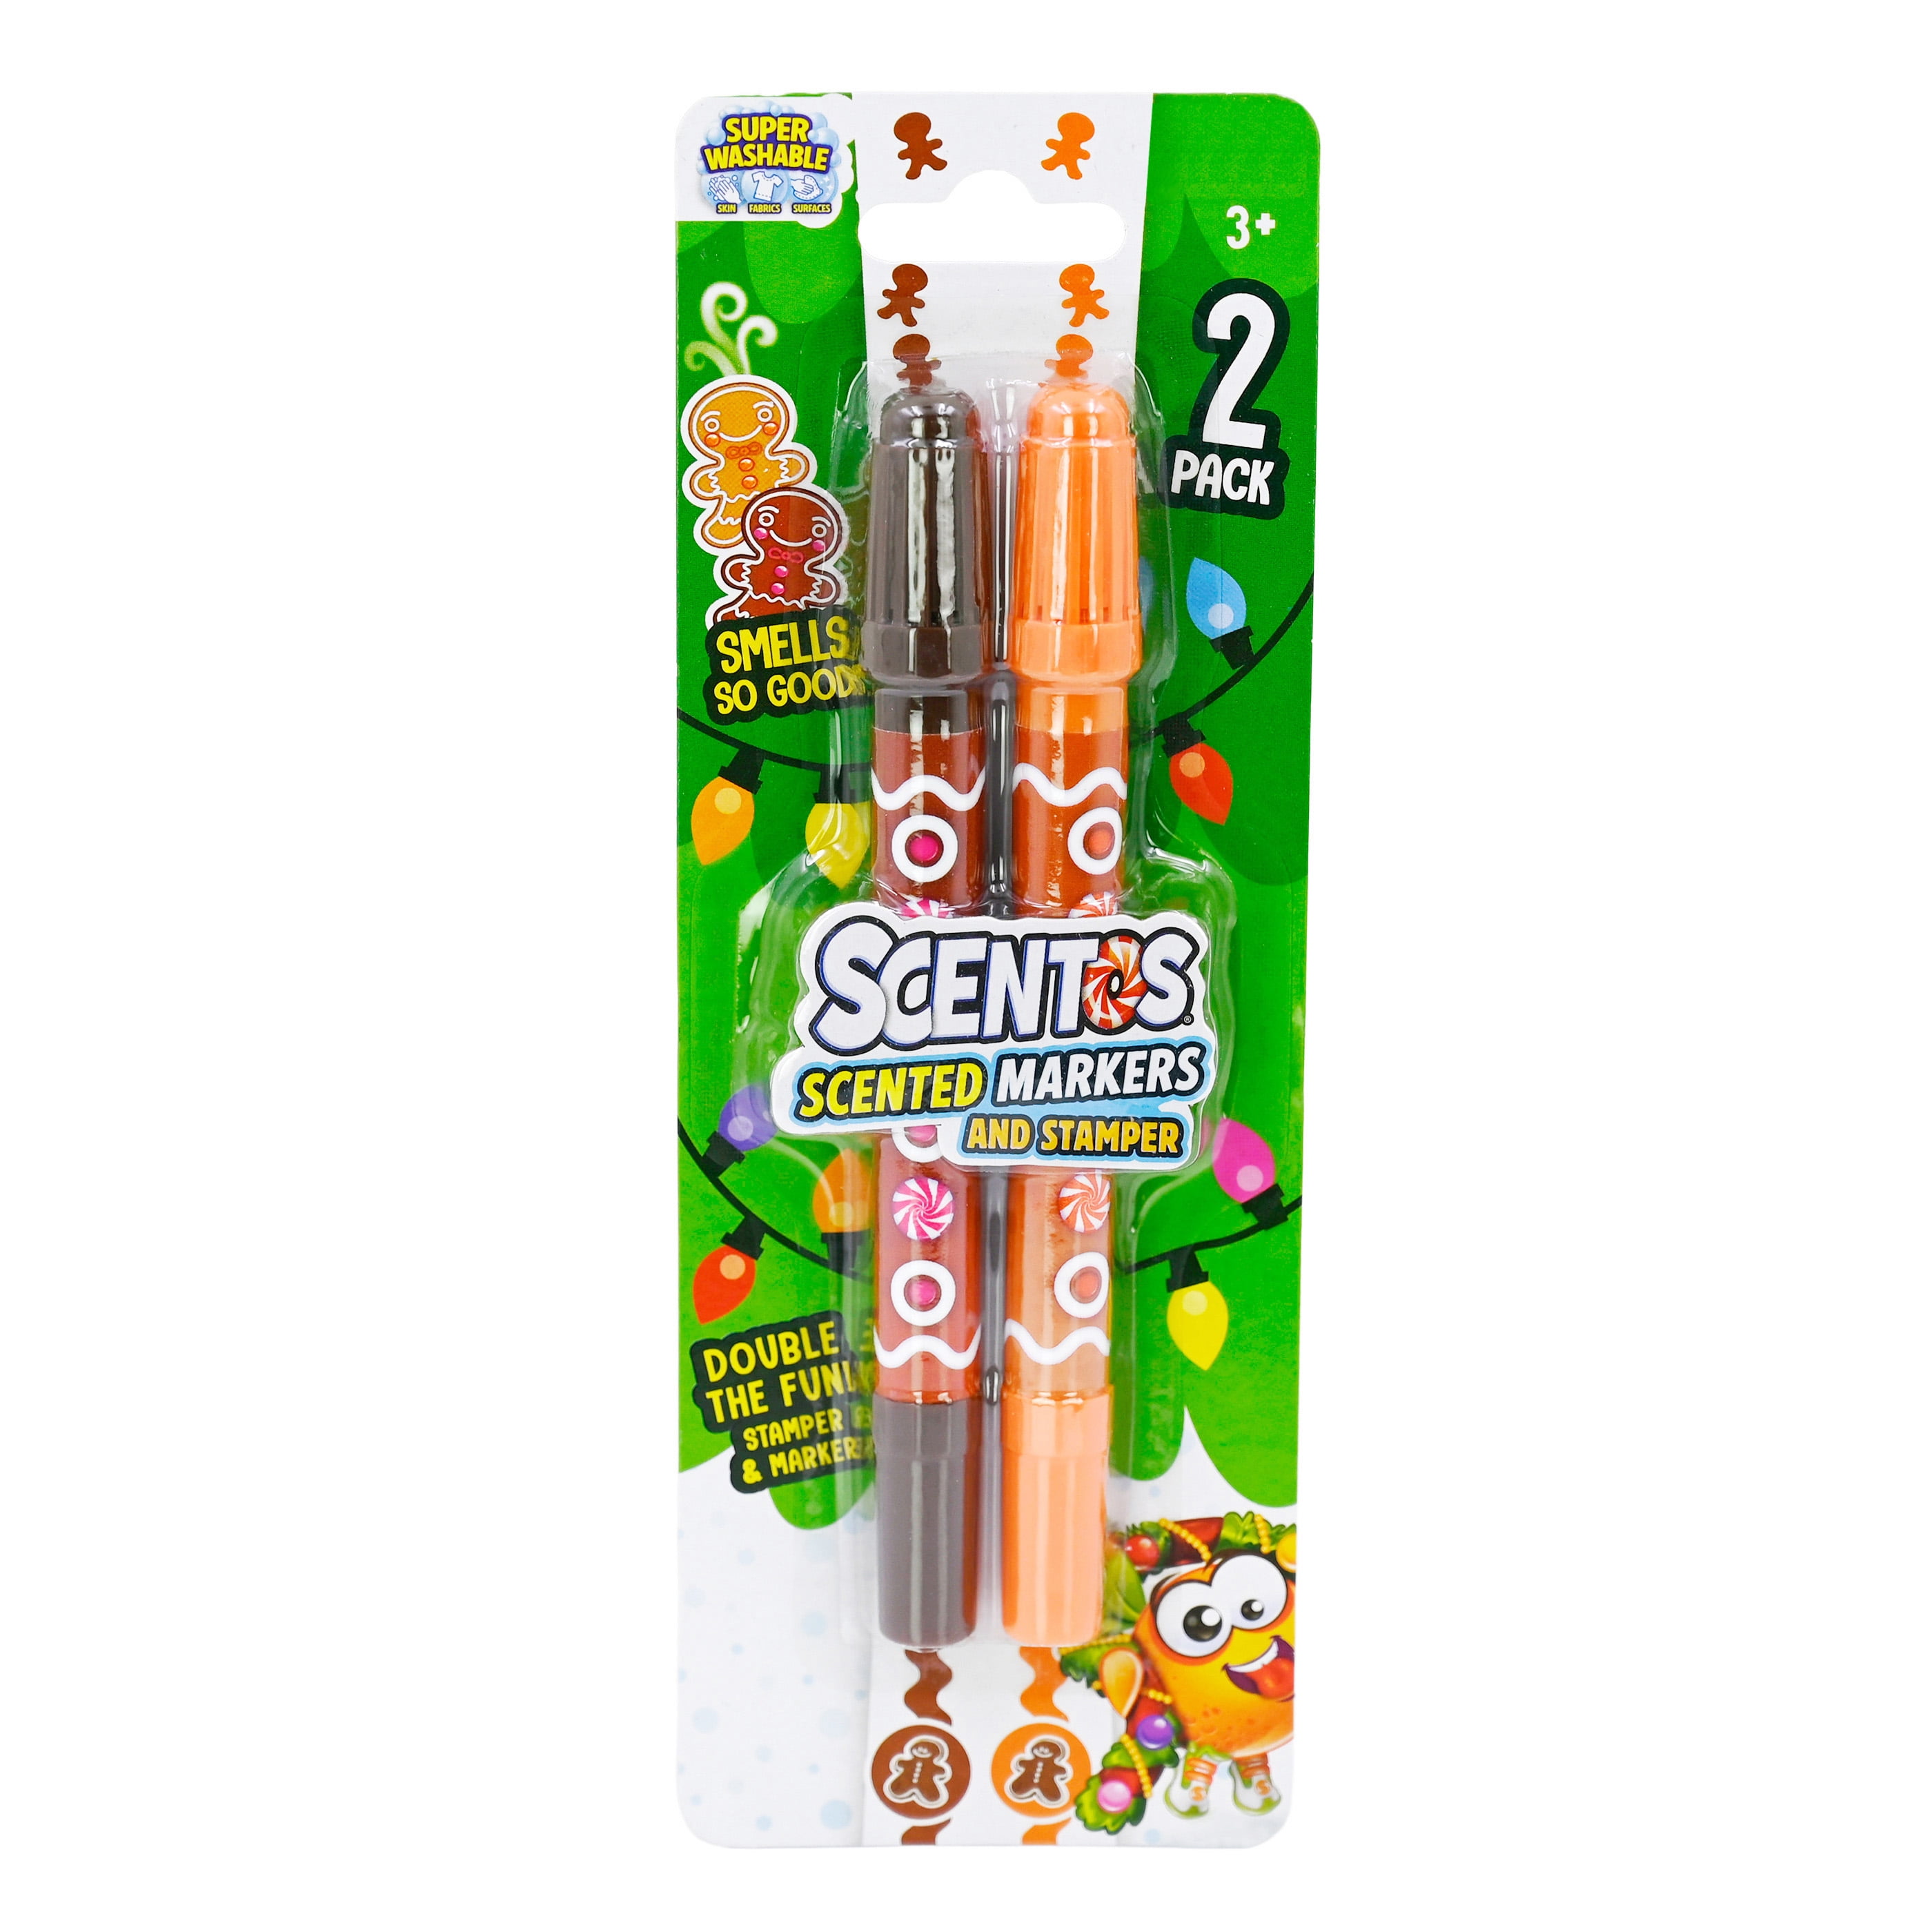 Scentos Colored Markers for Kids Ages 4-8 - Teacher Supplies & Markers for  School - Marker Set with Activity Book, Crayons, & Stickers (250-Pack)